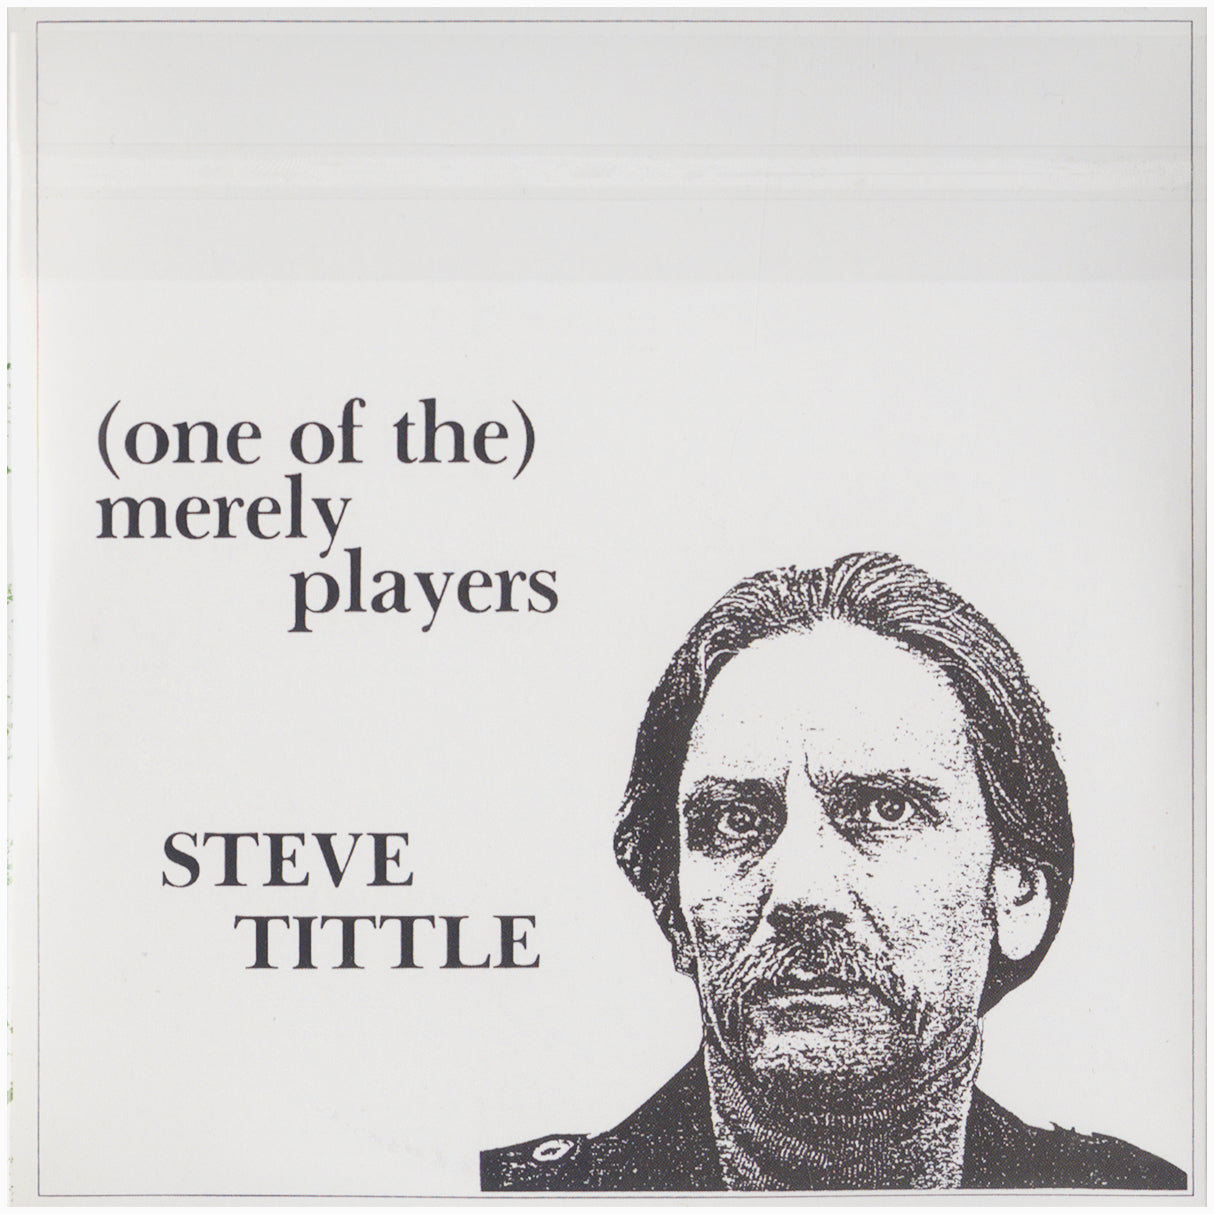 [CP 199.20 CD] Roberts Owen, Steve Tittle; Immature Oocytes, (One Of The) Merely Players